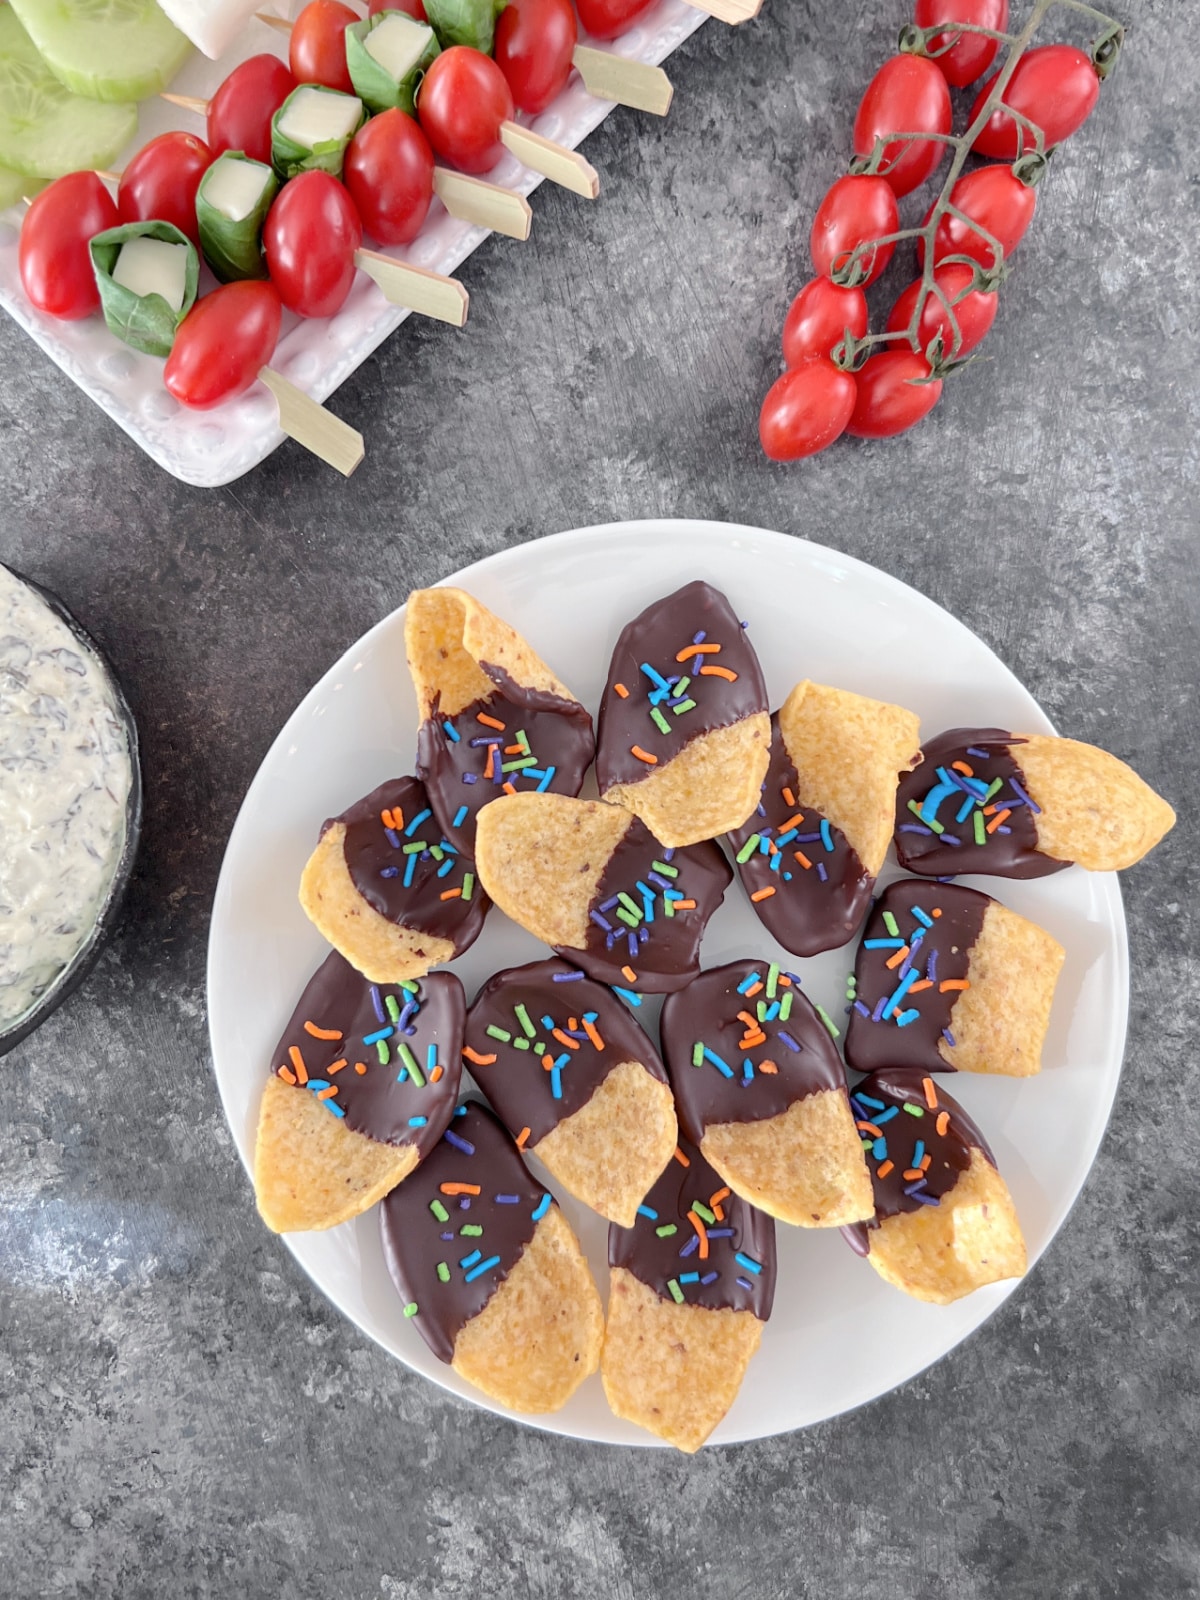 Overhead view of a white plate of chocolate dipped corn chips with multi colored sprinkles in the chocolate. Another serving plate of veggies and crackers is blurred in background on a table set for a party.